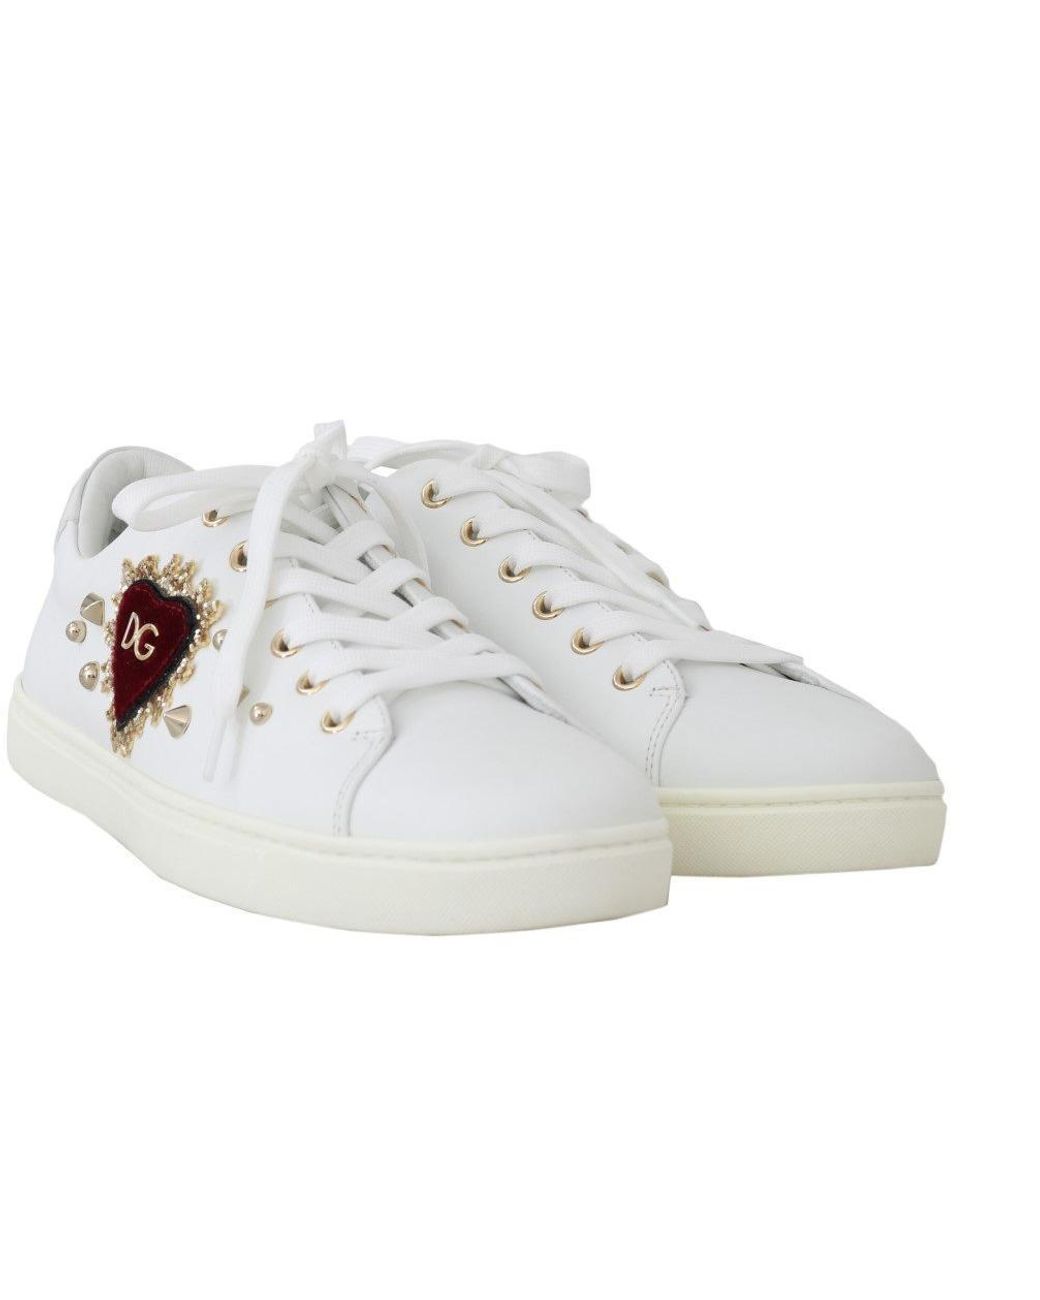 Dolce & Gabbana White Leather Gold Red Heart Sneakers | Lyst